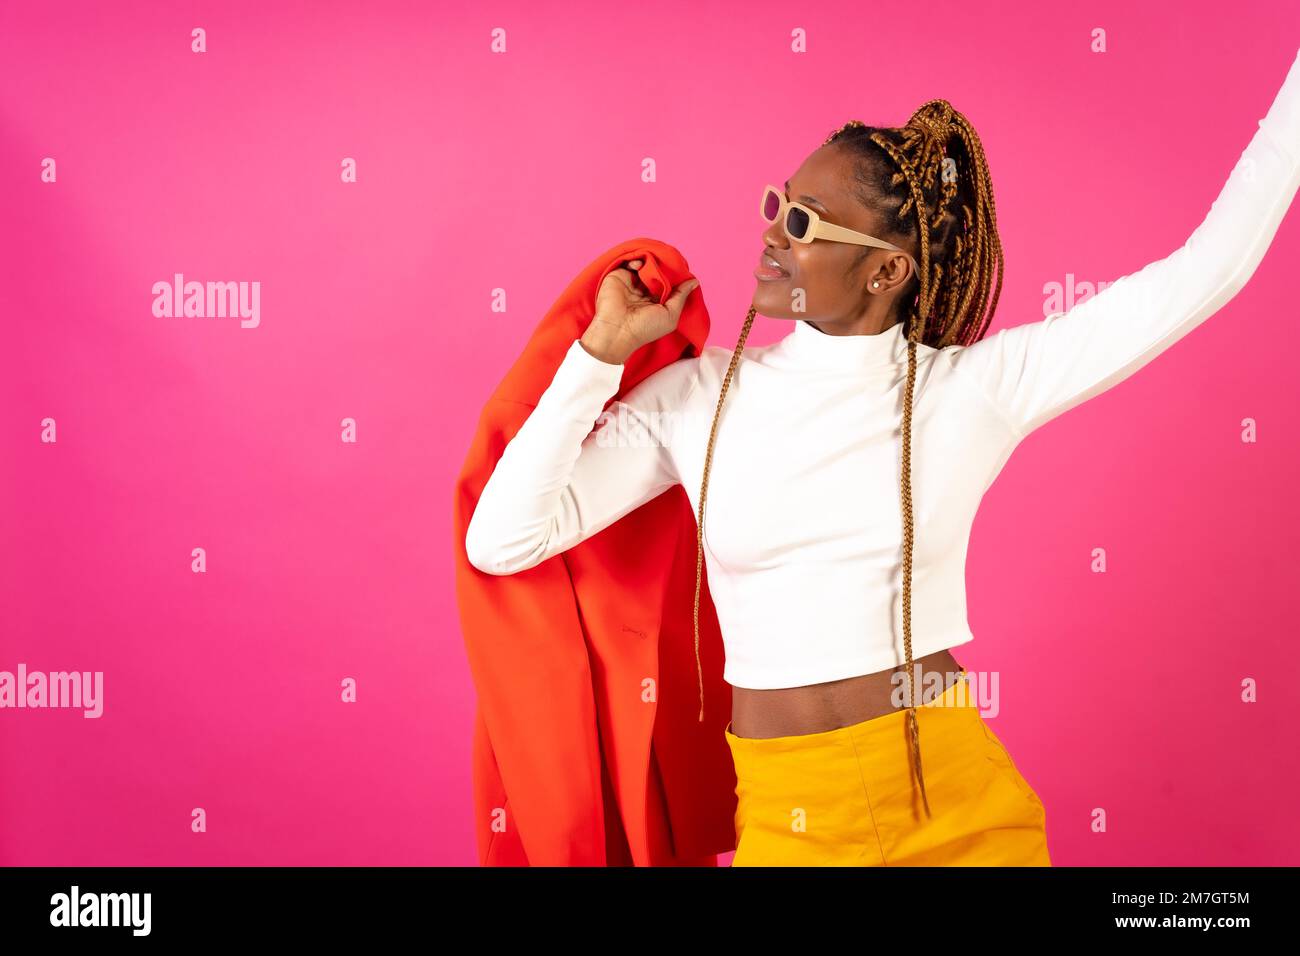 Black ethnic woman with braids on a pink background, wearing a red suit and white t-shirt dancing Stock Photo